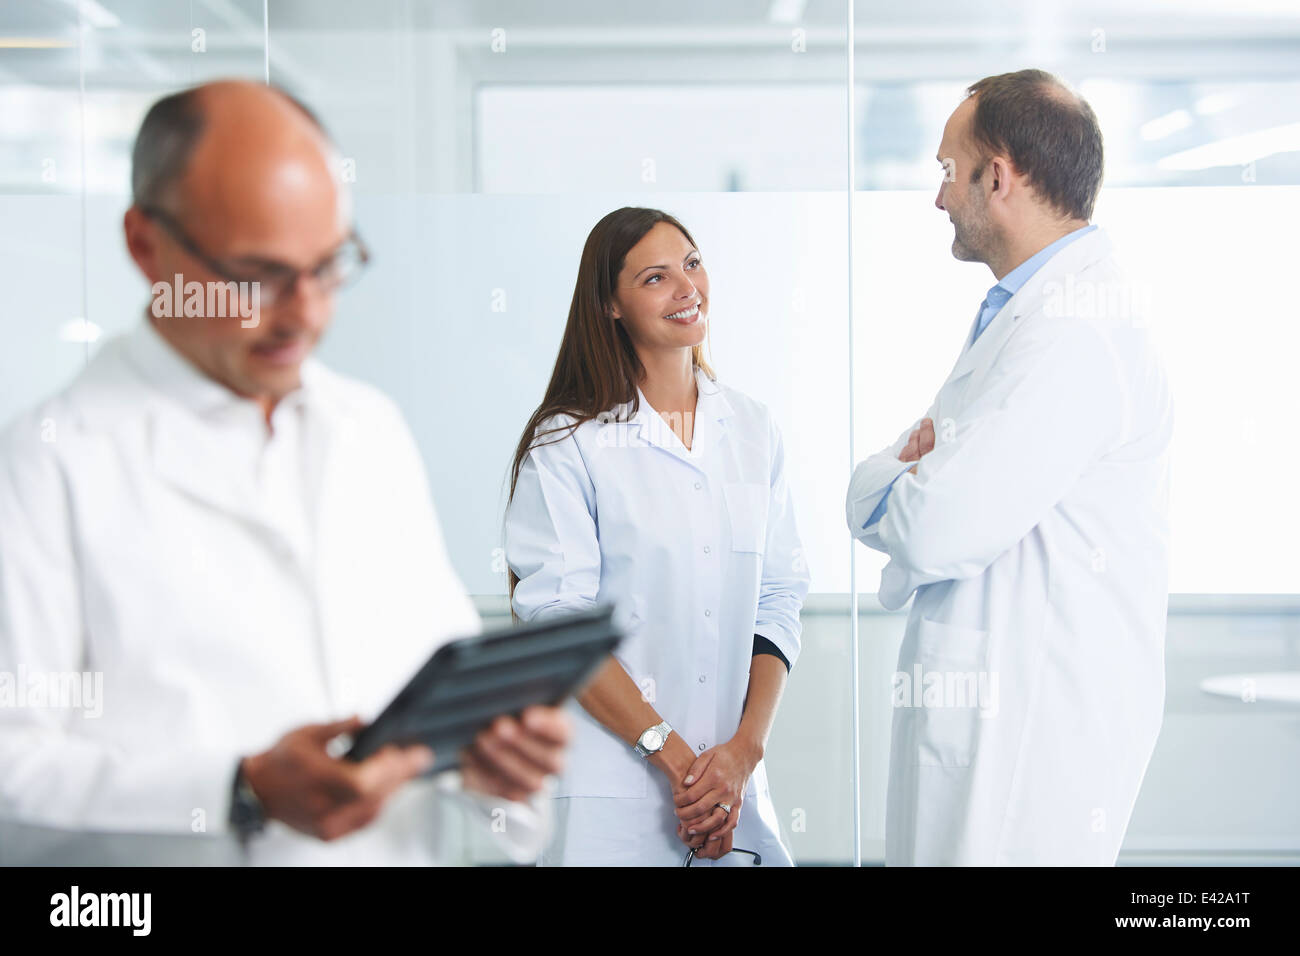 Male doctor using digital tablet, colleagues in background Stock Photo